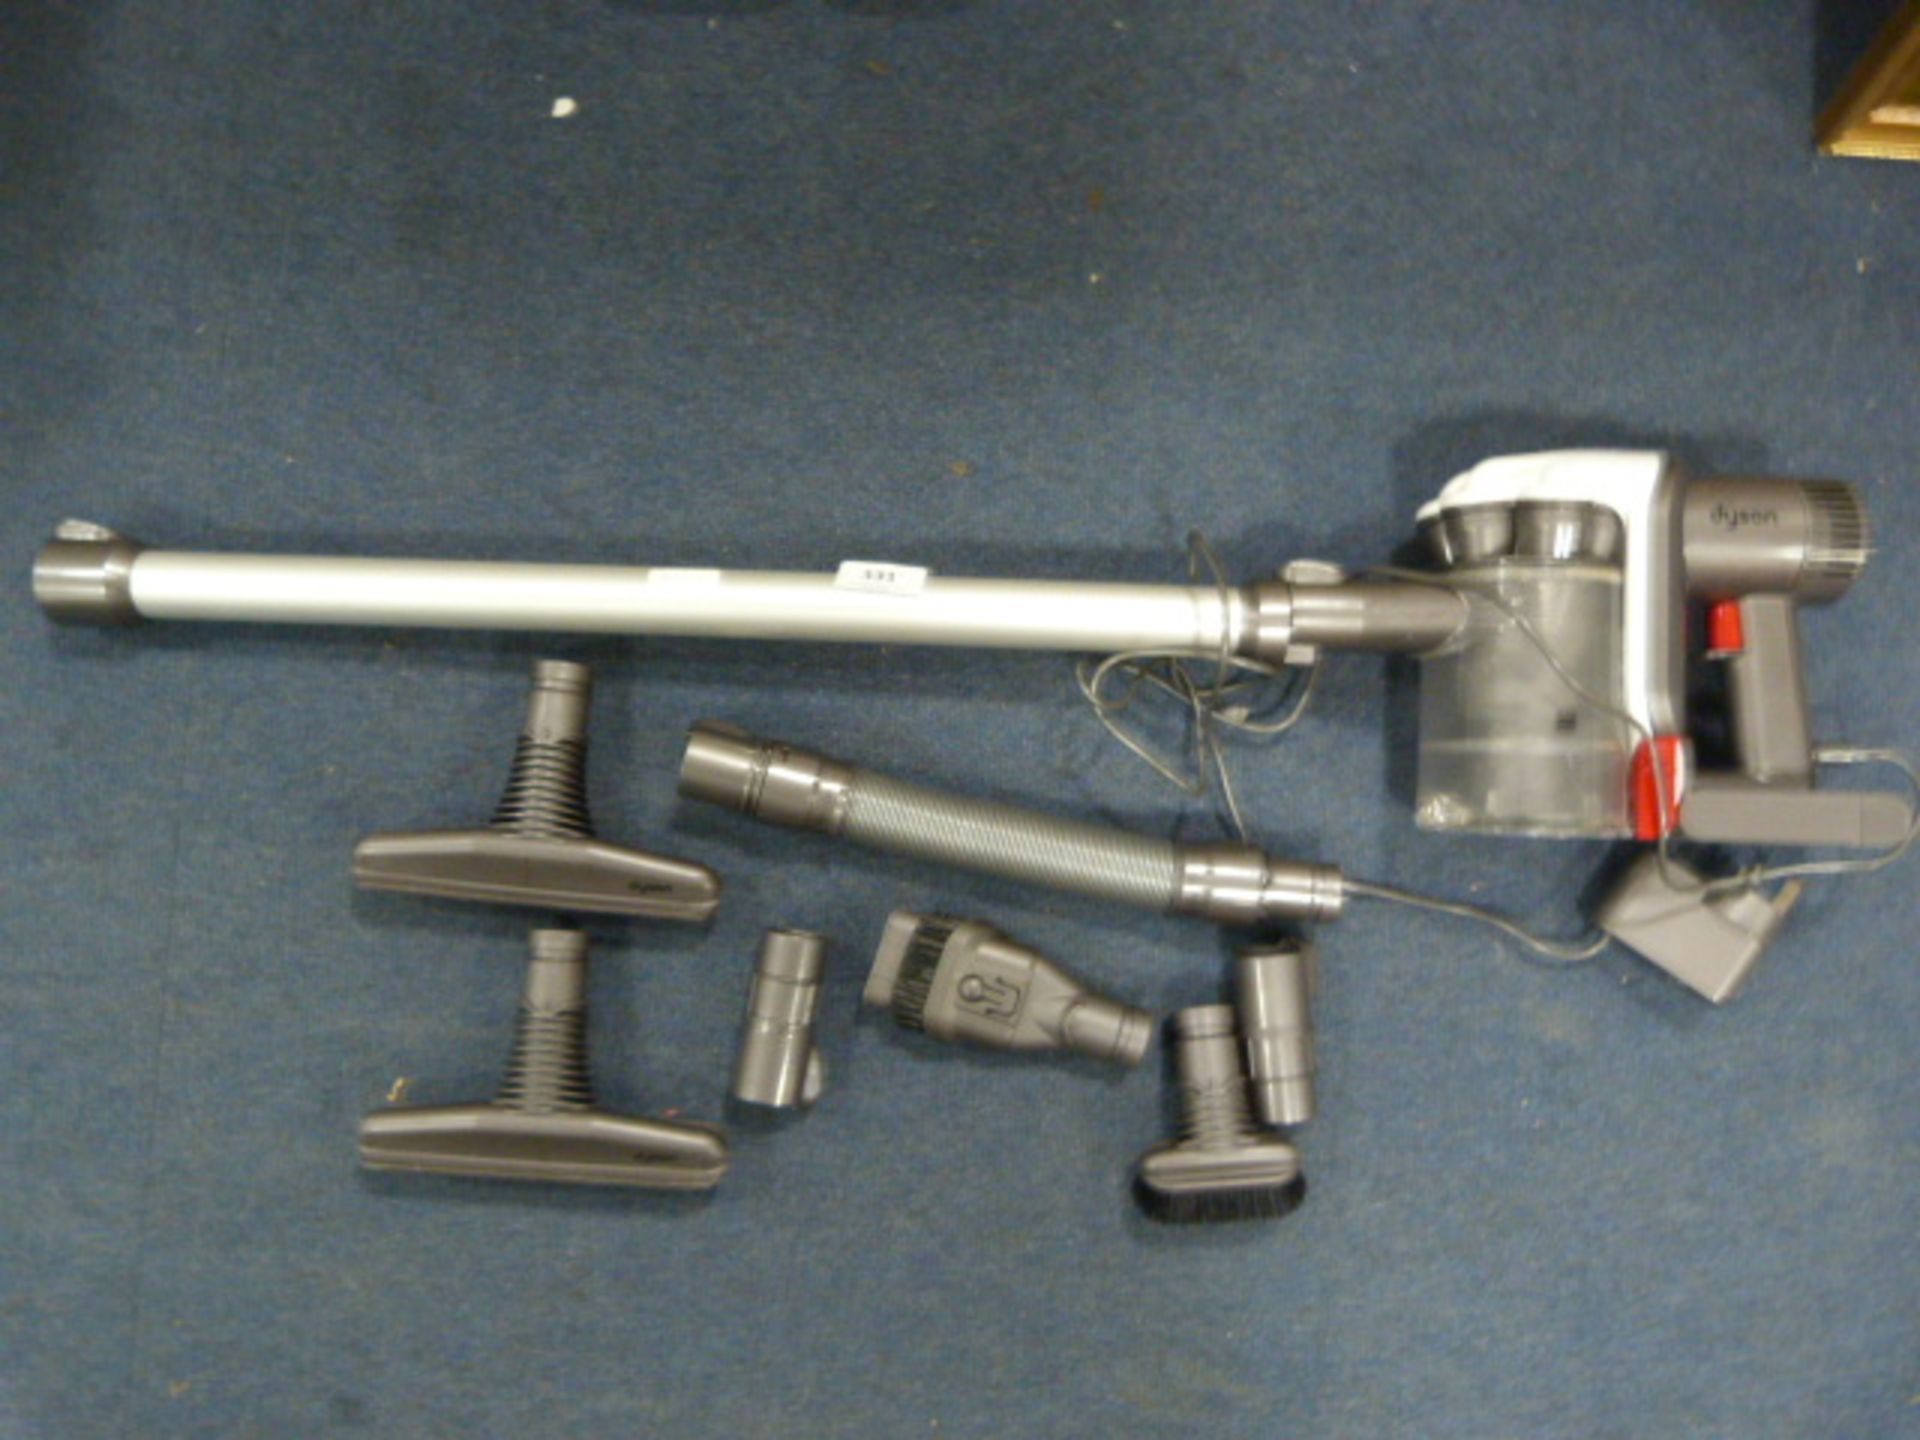 Dyson Handheld Vacuum with Components